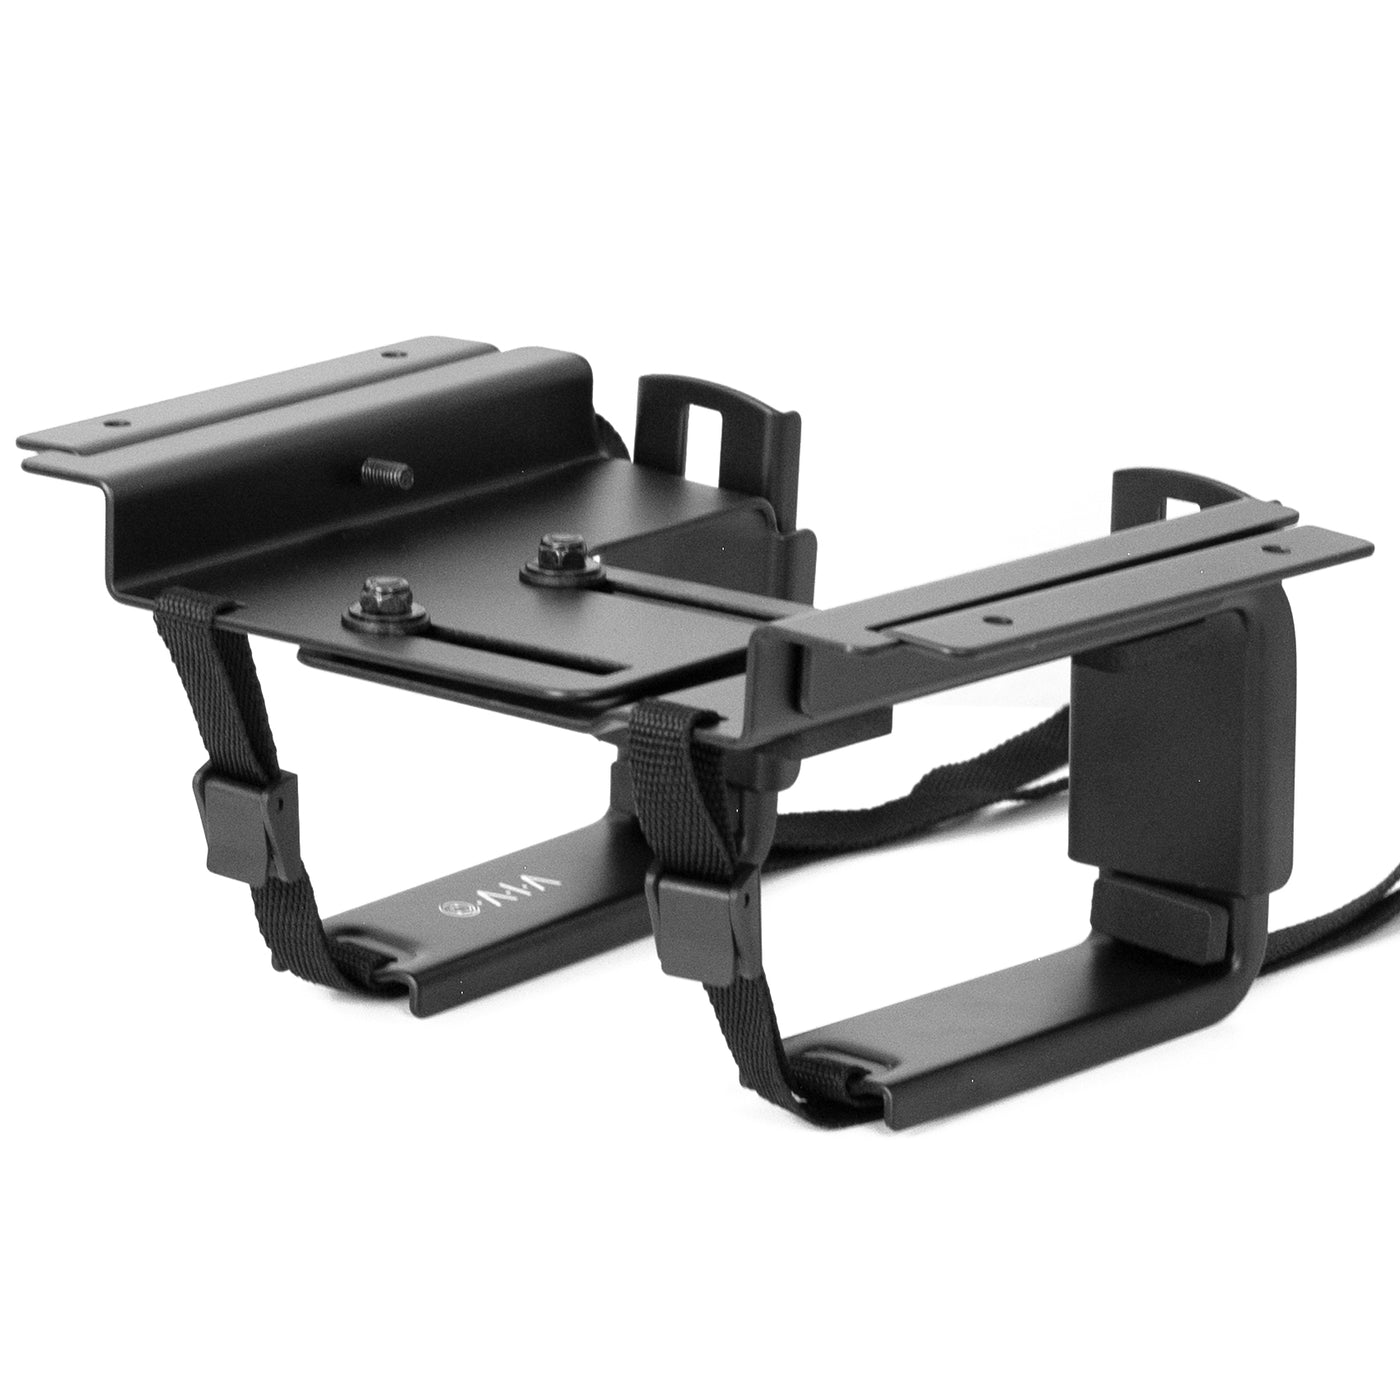 Wall or under-desk PC mount.